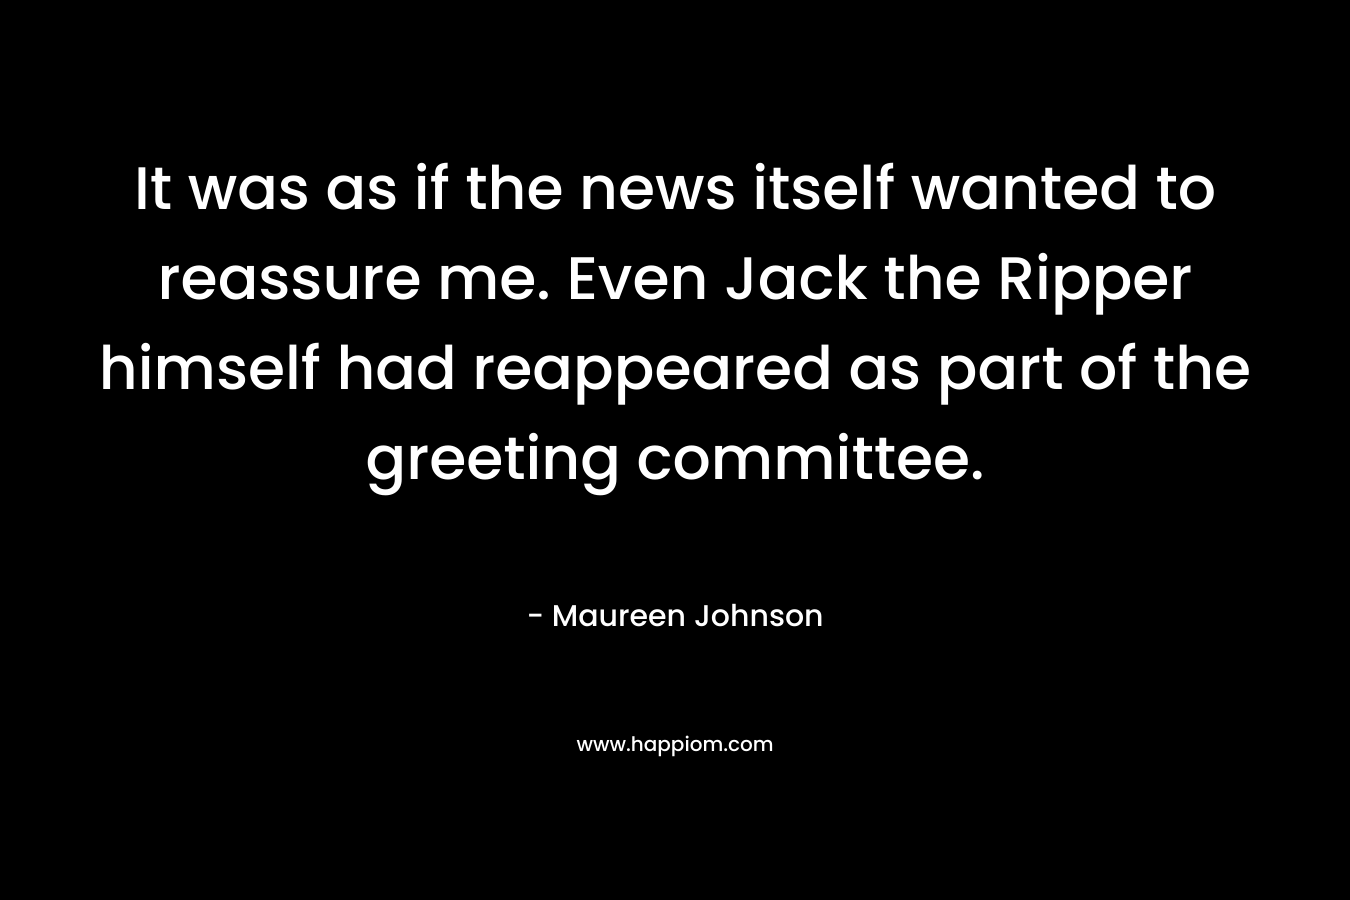 It was as if the news itself wanted to reassure me. Even Jack the Ripper himself had reappeared as part of the greeting committee. – Maureen Johnson